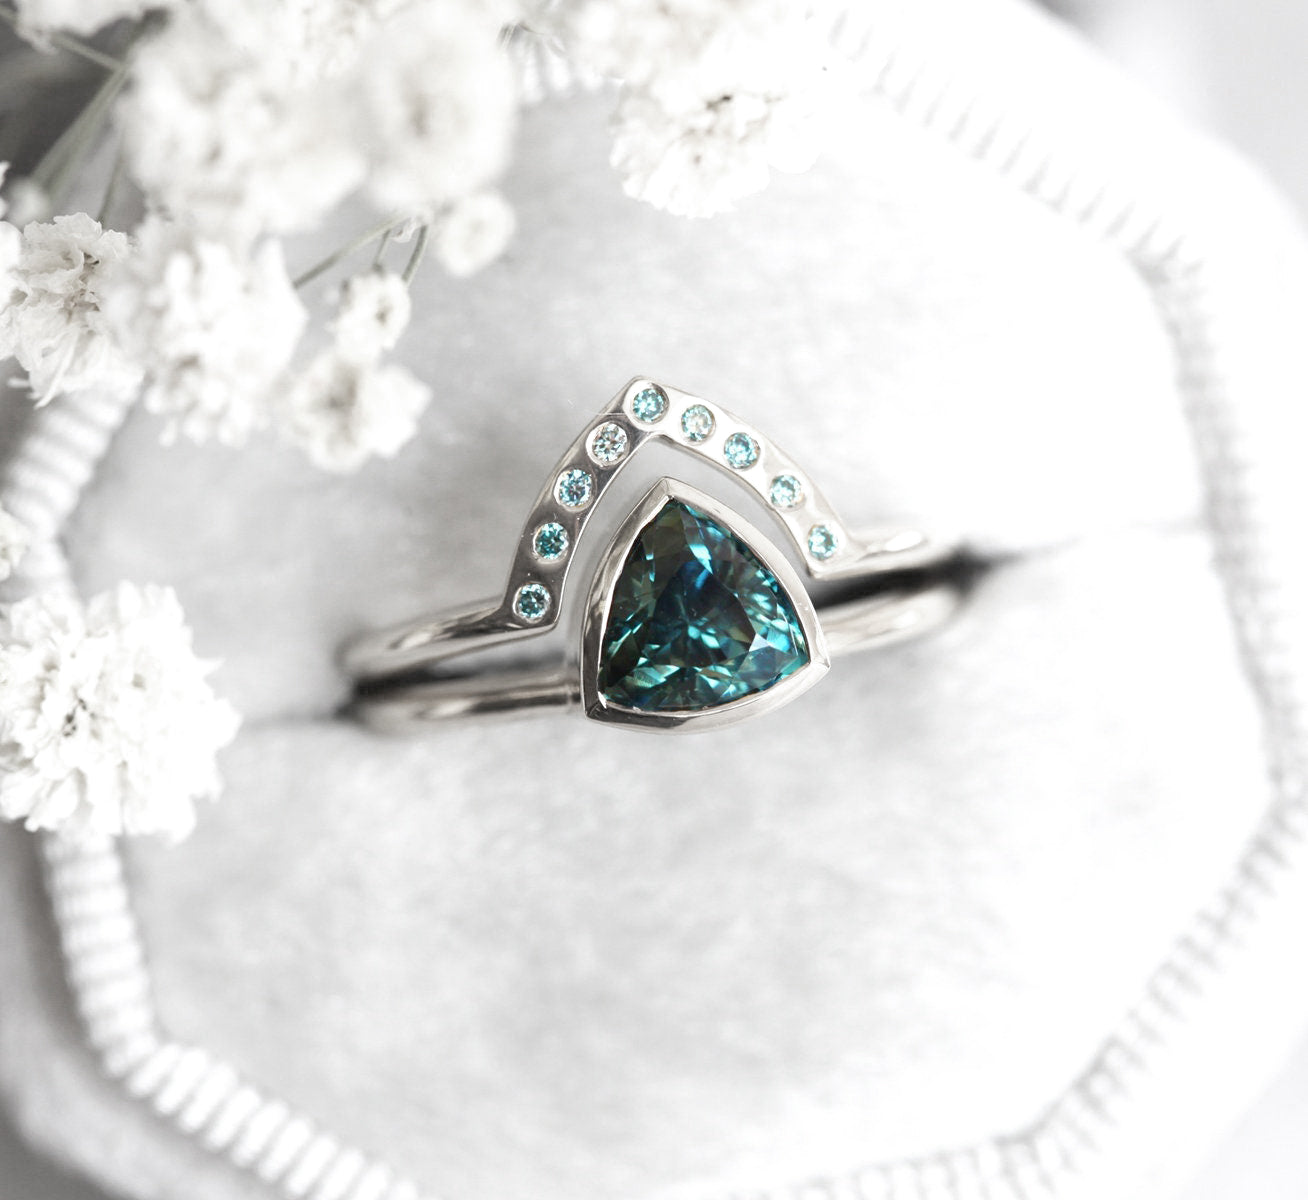 Trillion-cut teal sapphire engagement ring with blue diamond band